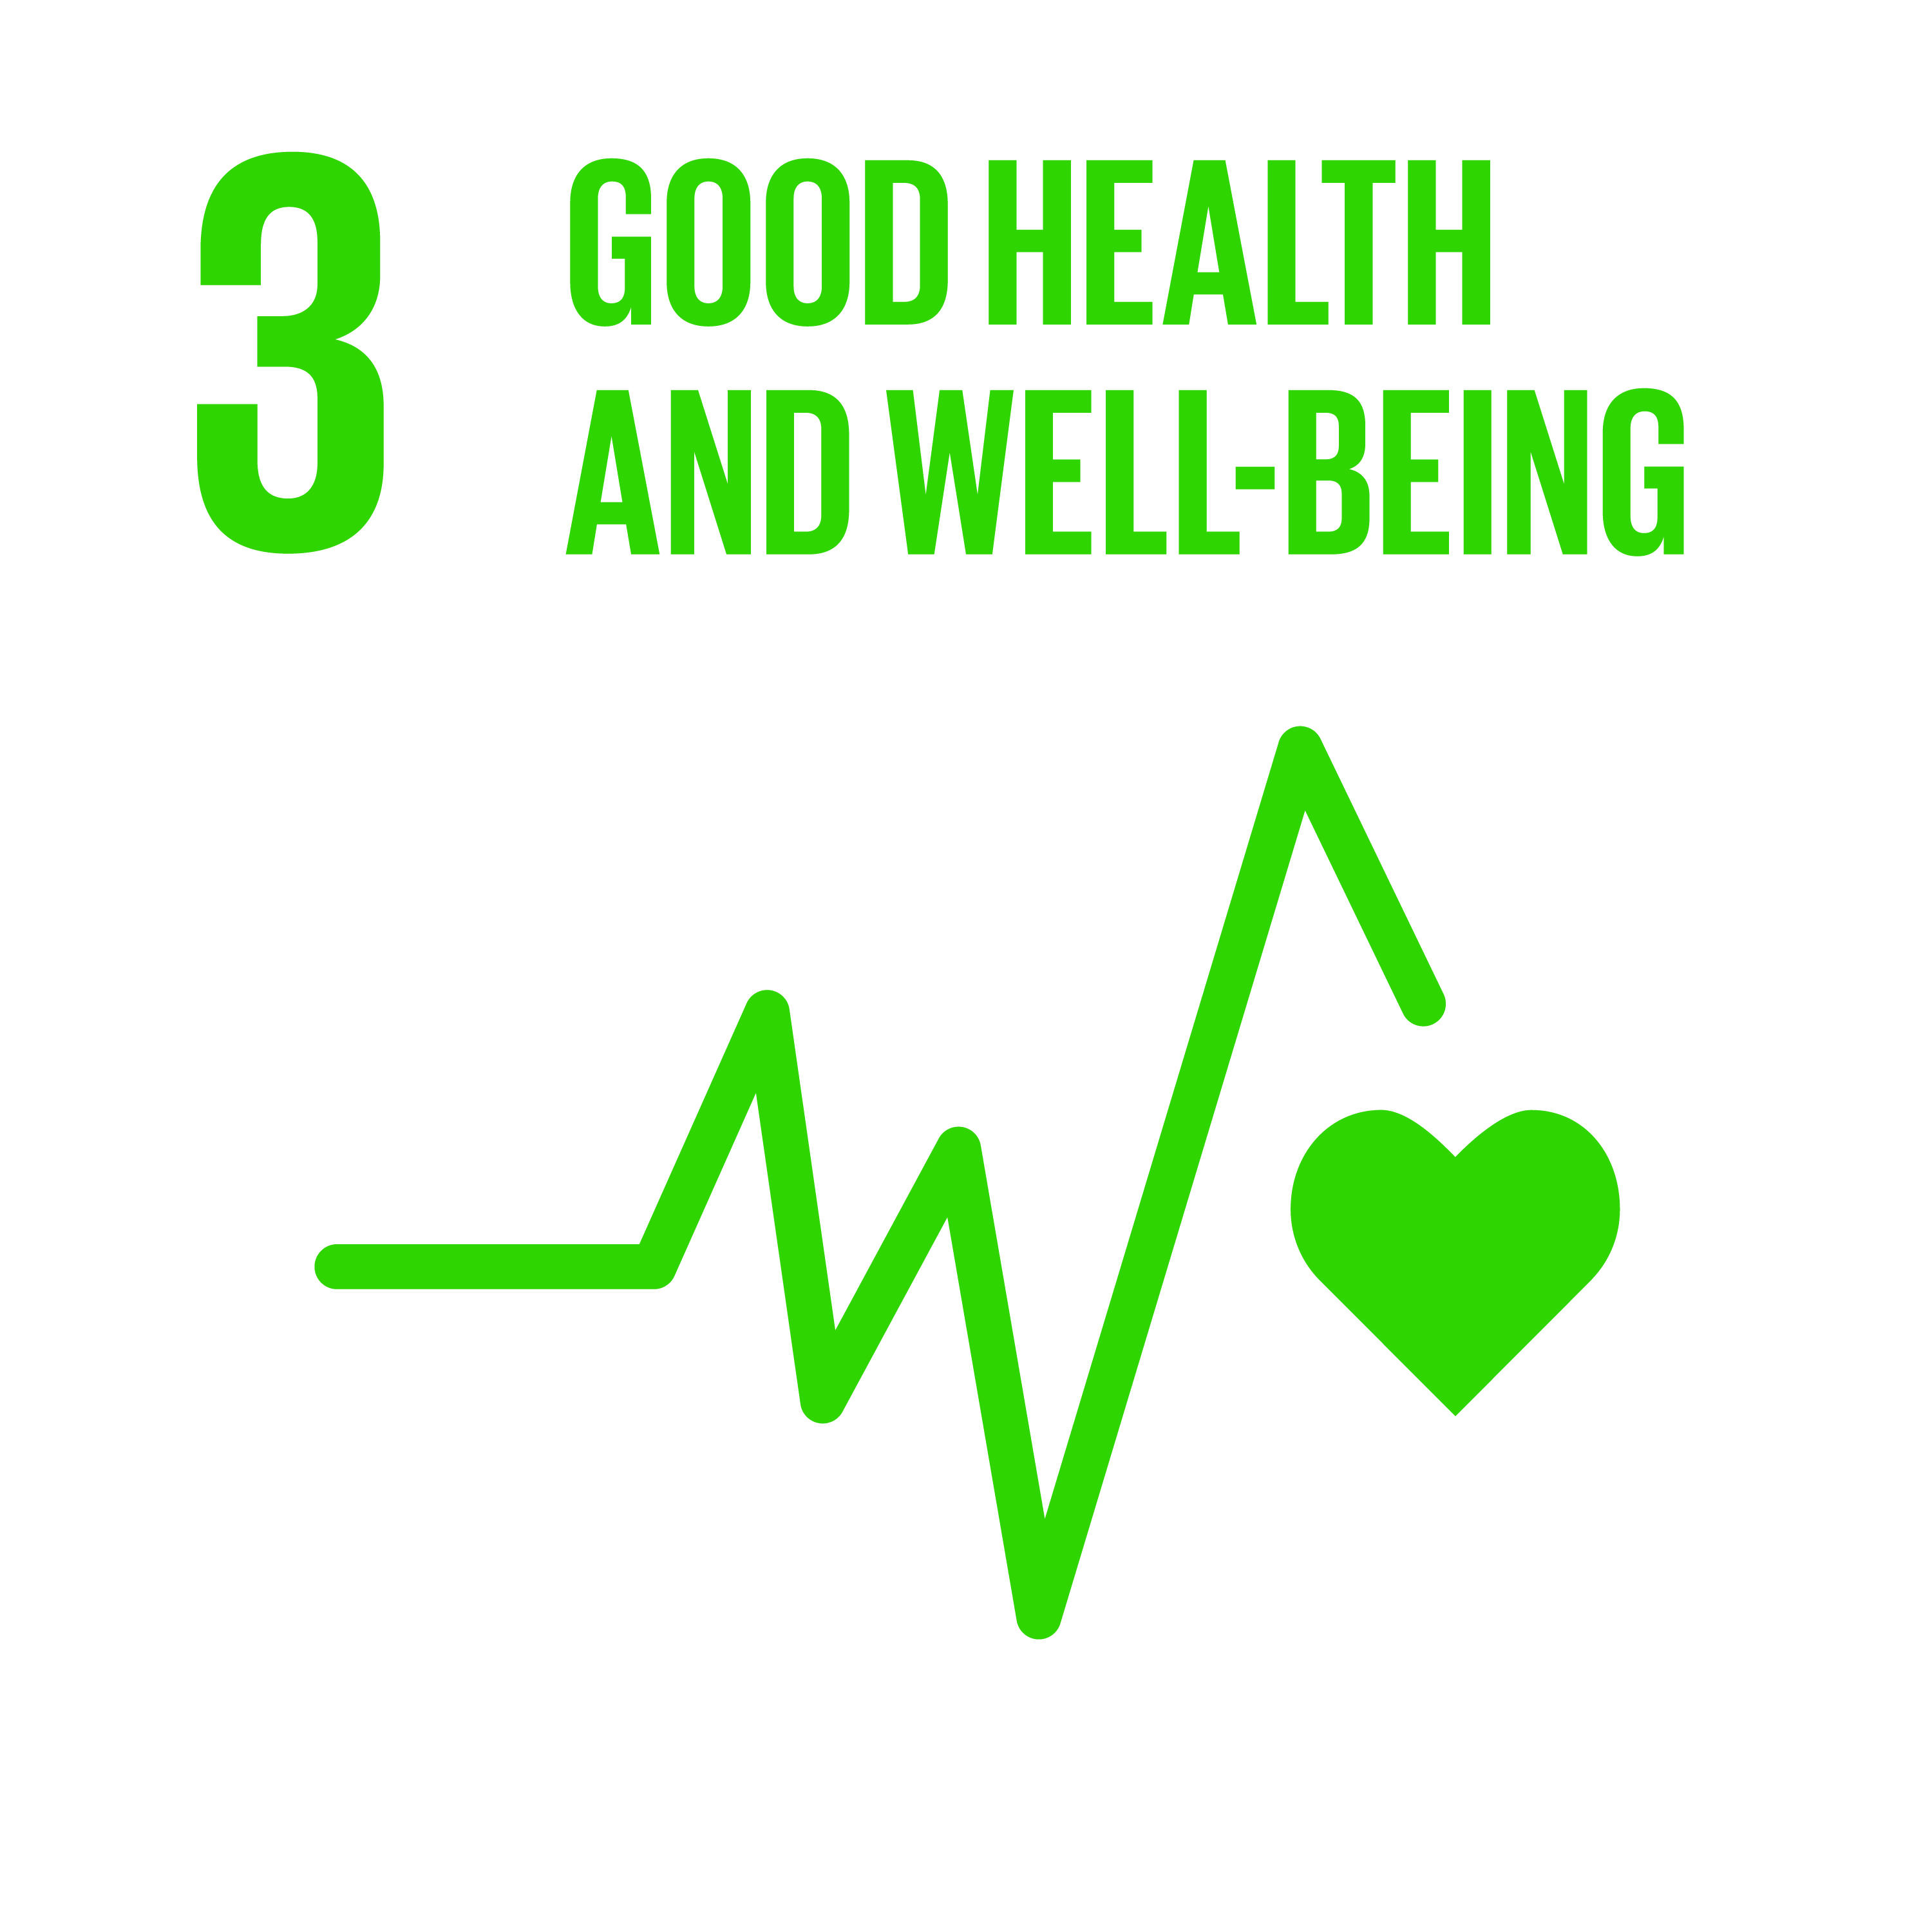 Sustainable development goals: Good health and wellbeing